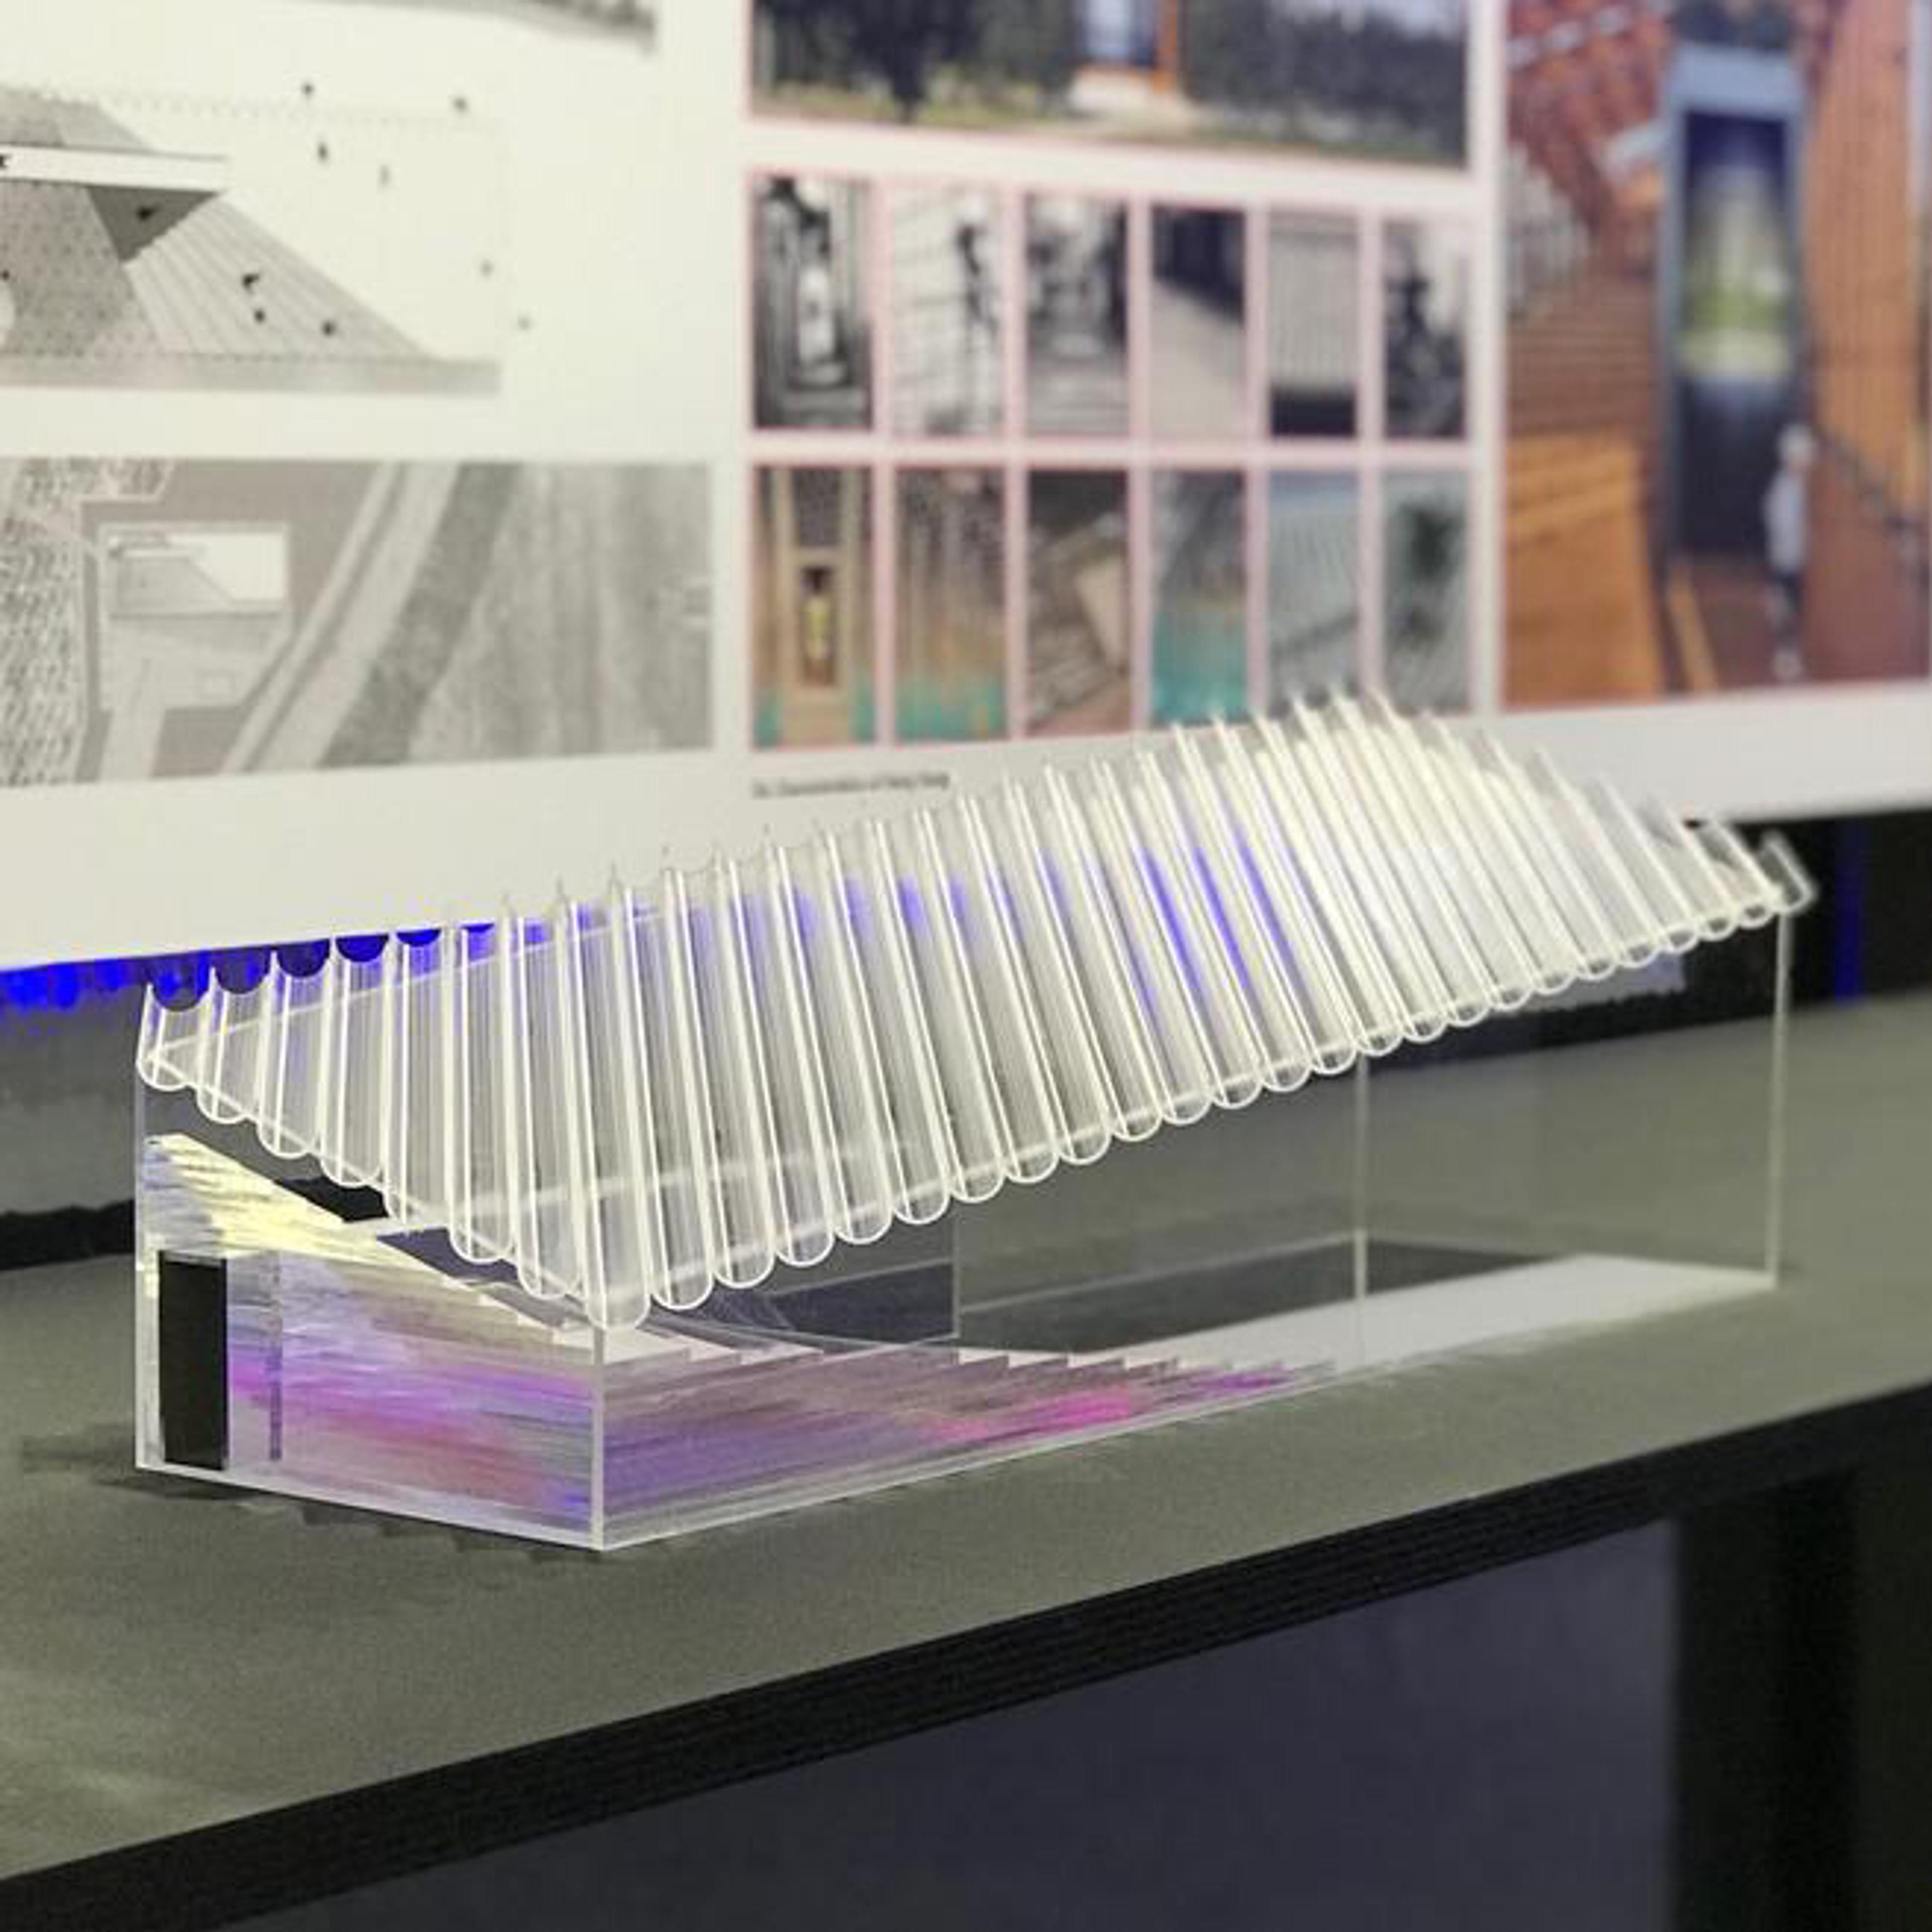 Architectural model on display